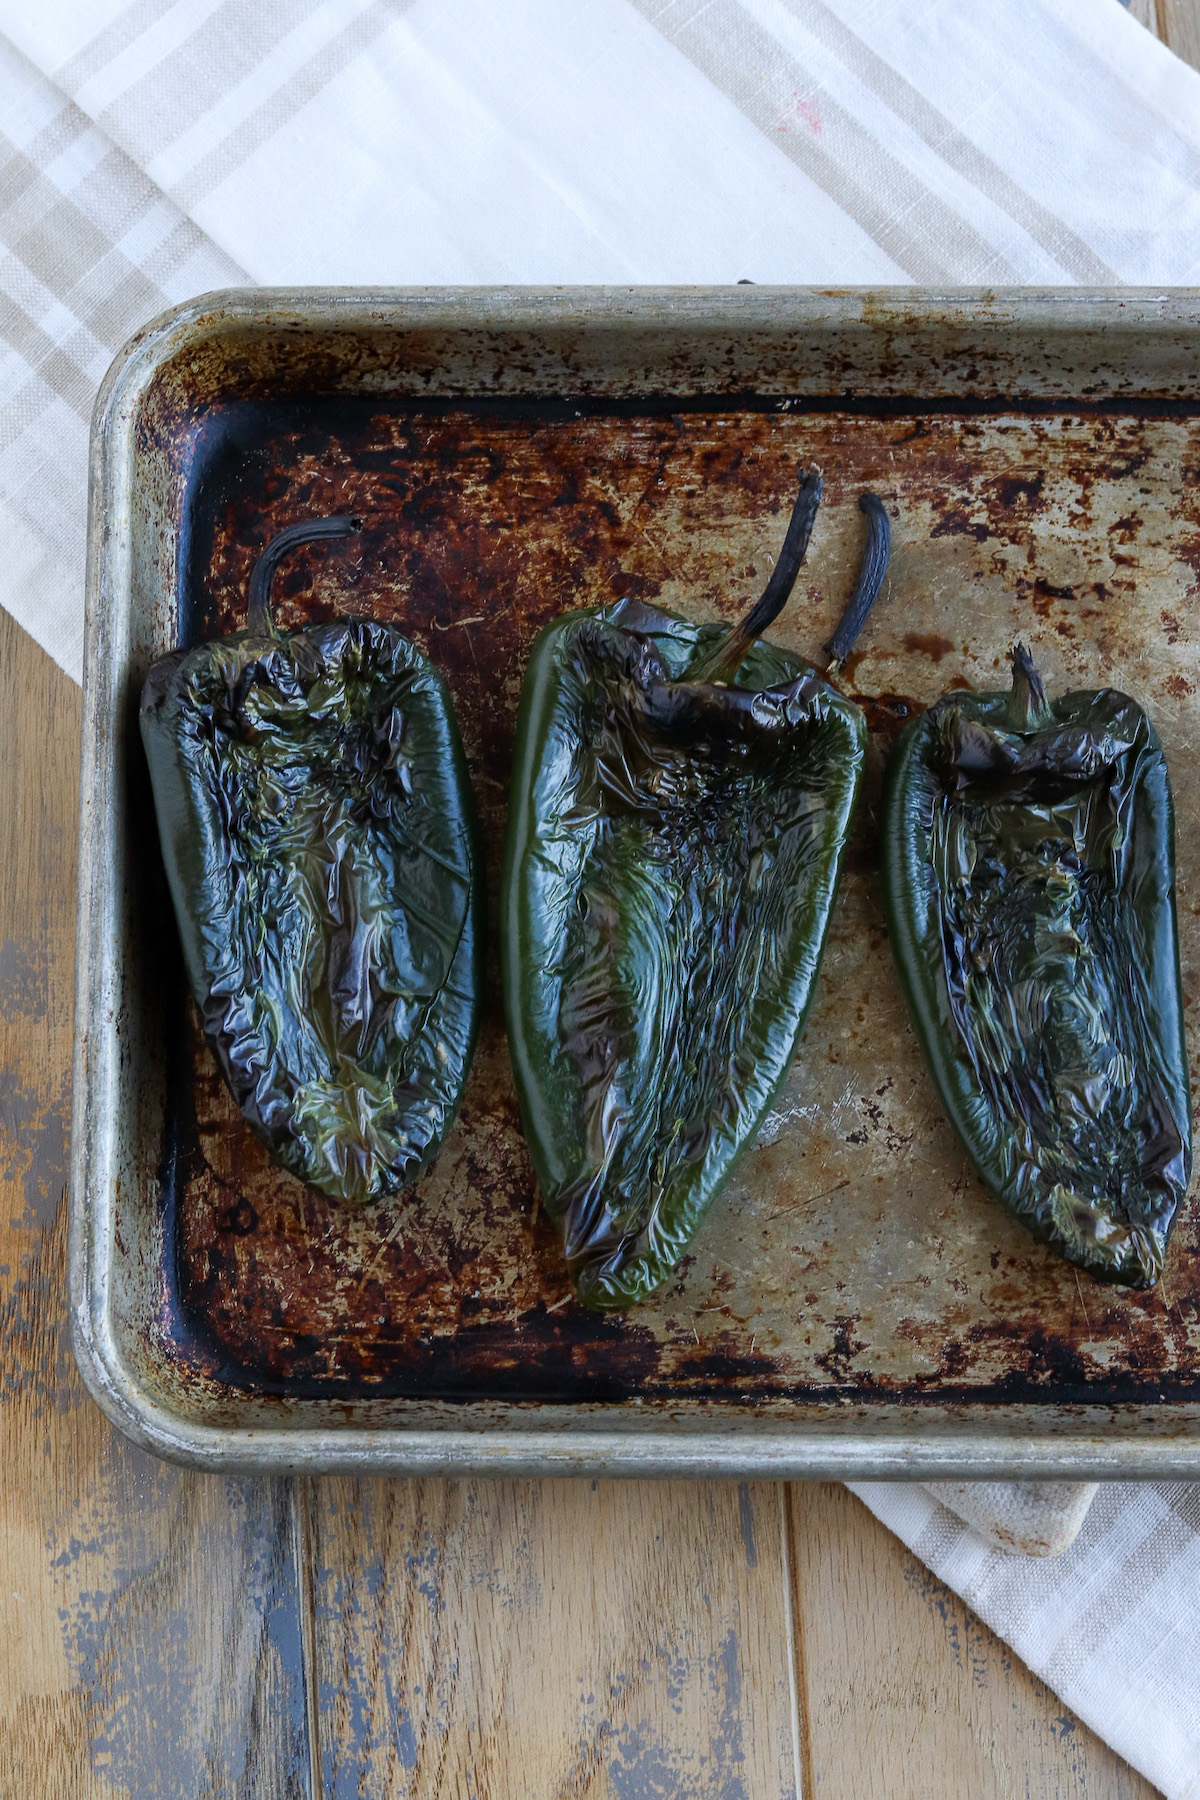 charred poblano peppers with blistered skin